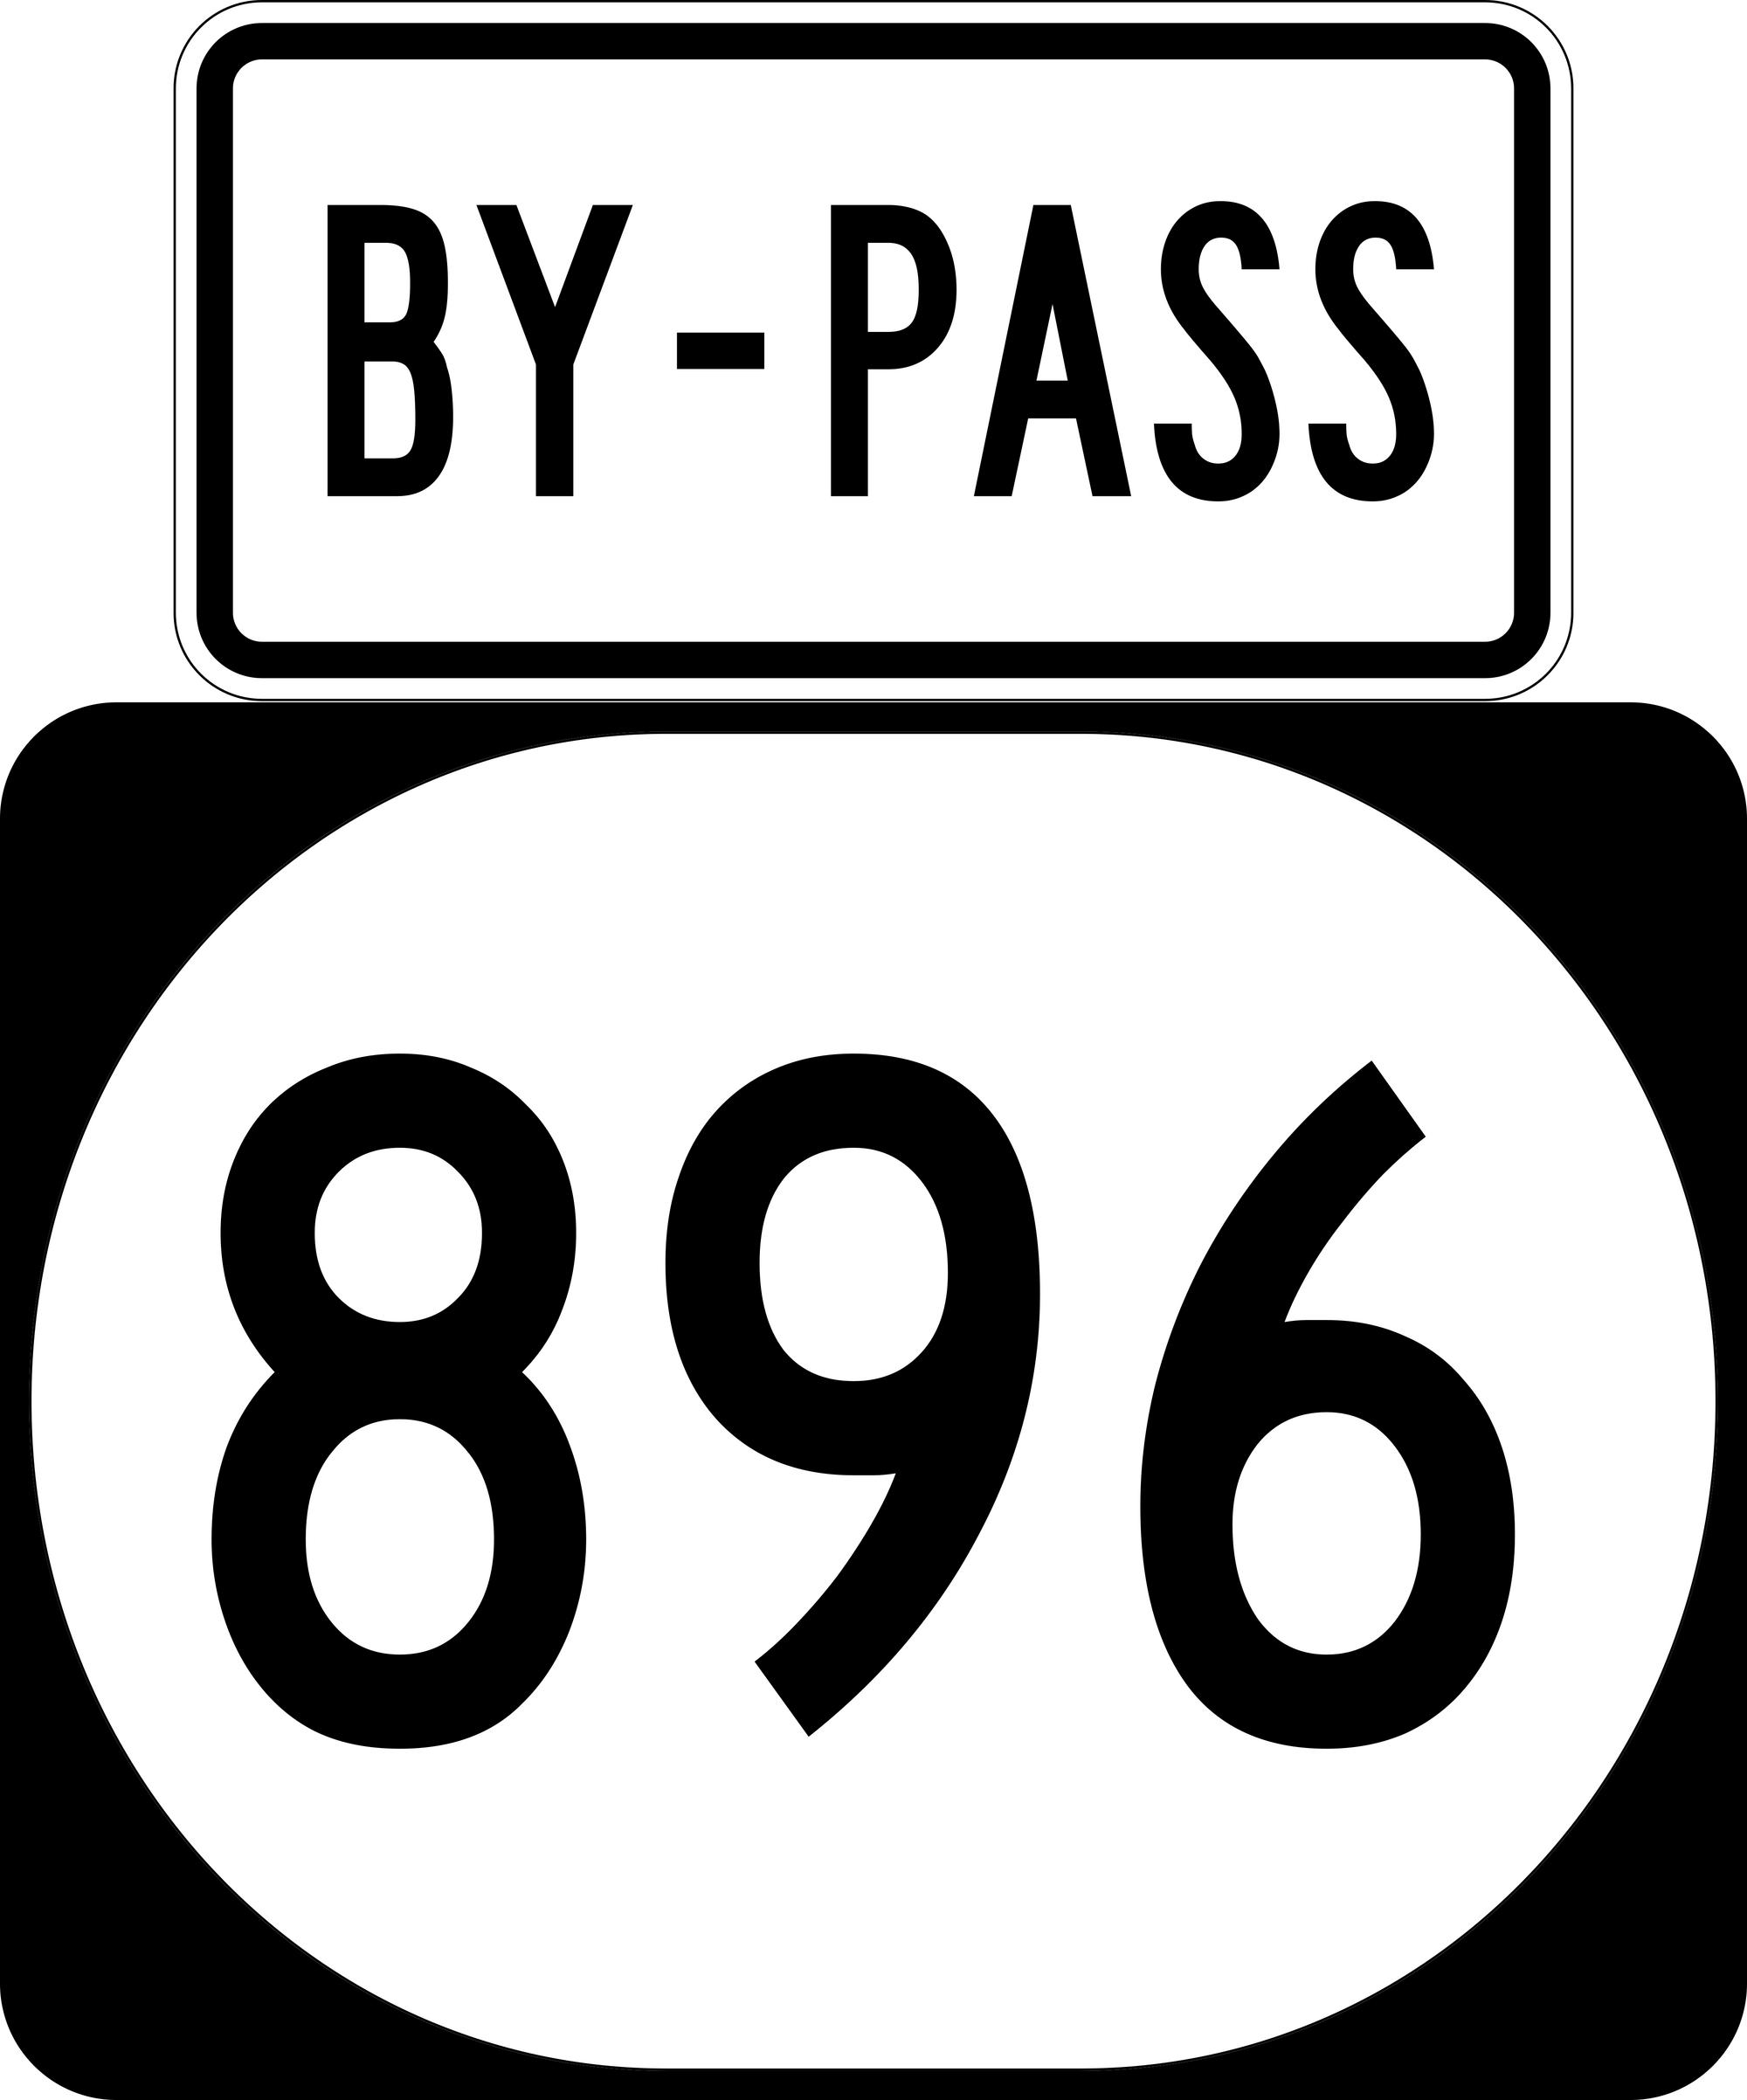 Delaware Route 896 By Pass Ultimate Driving Universe Wikia Fandom - roblox how to bypass a pass